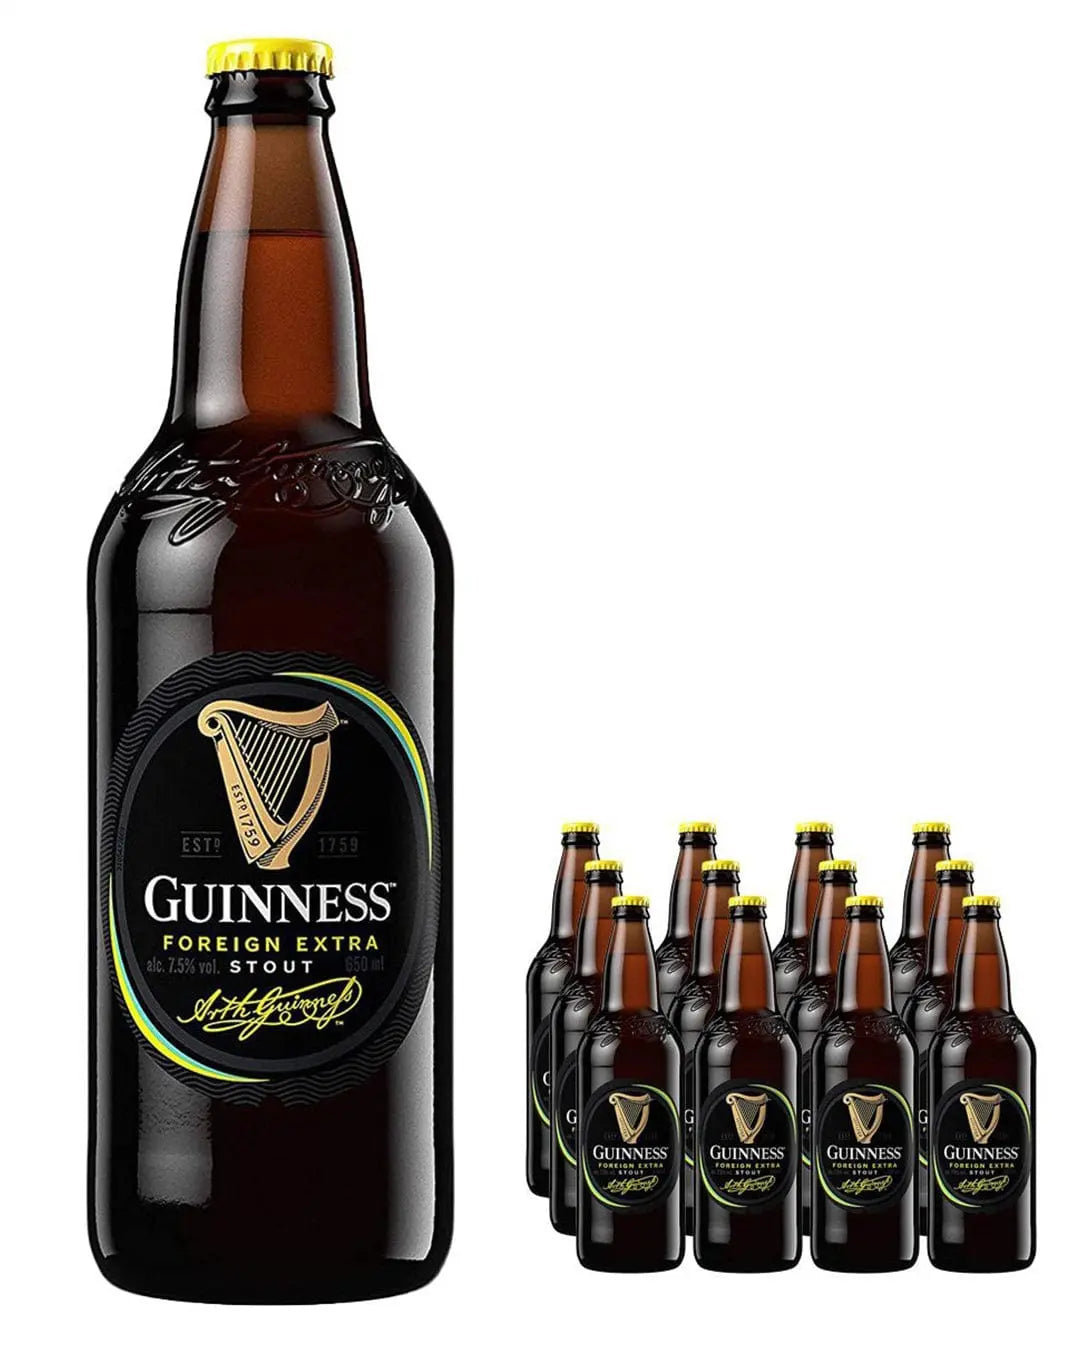 Guinness Foreign Extra Stout Beer Bottle Multipack, 12 x 650 ml Beer